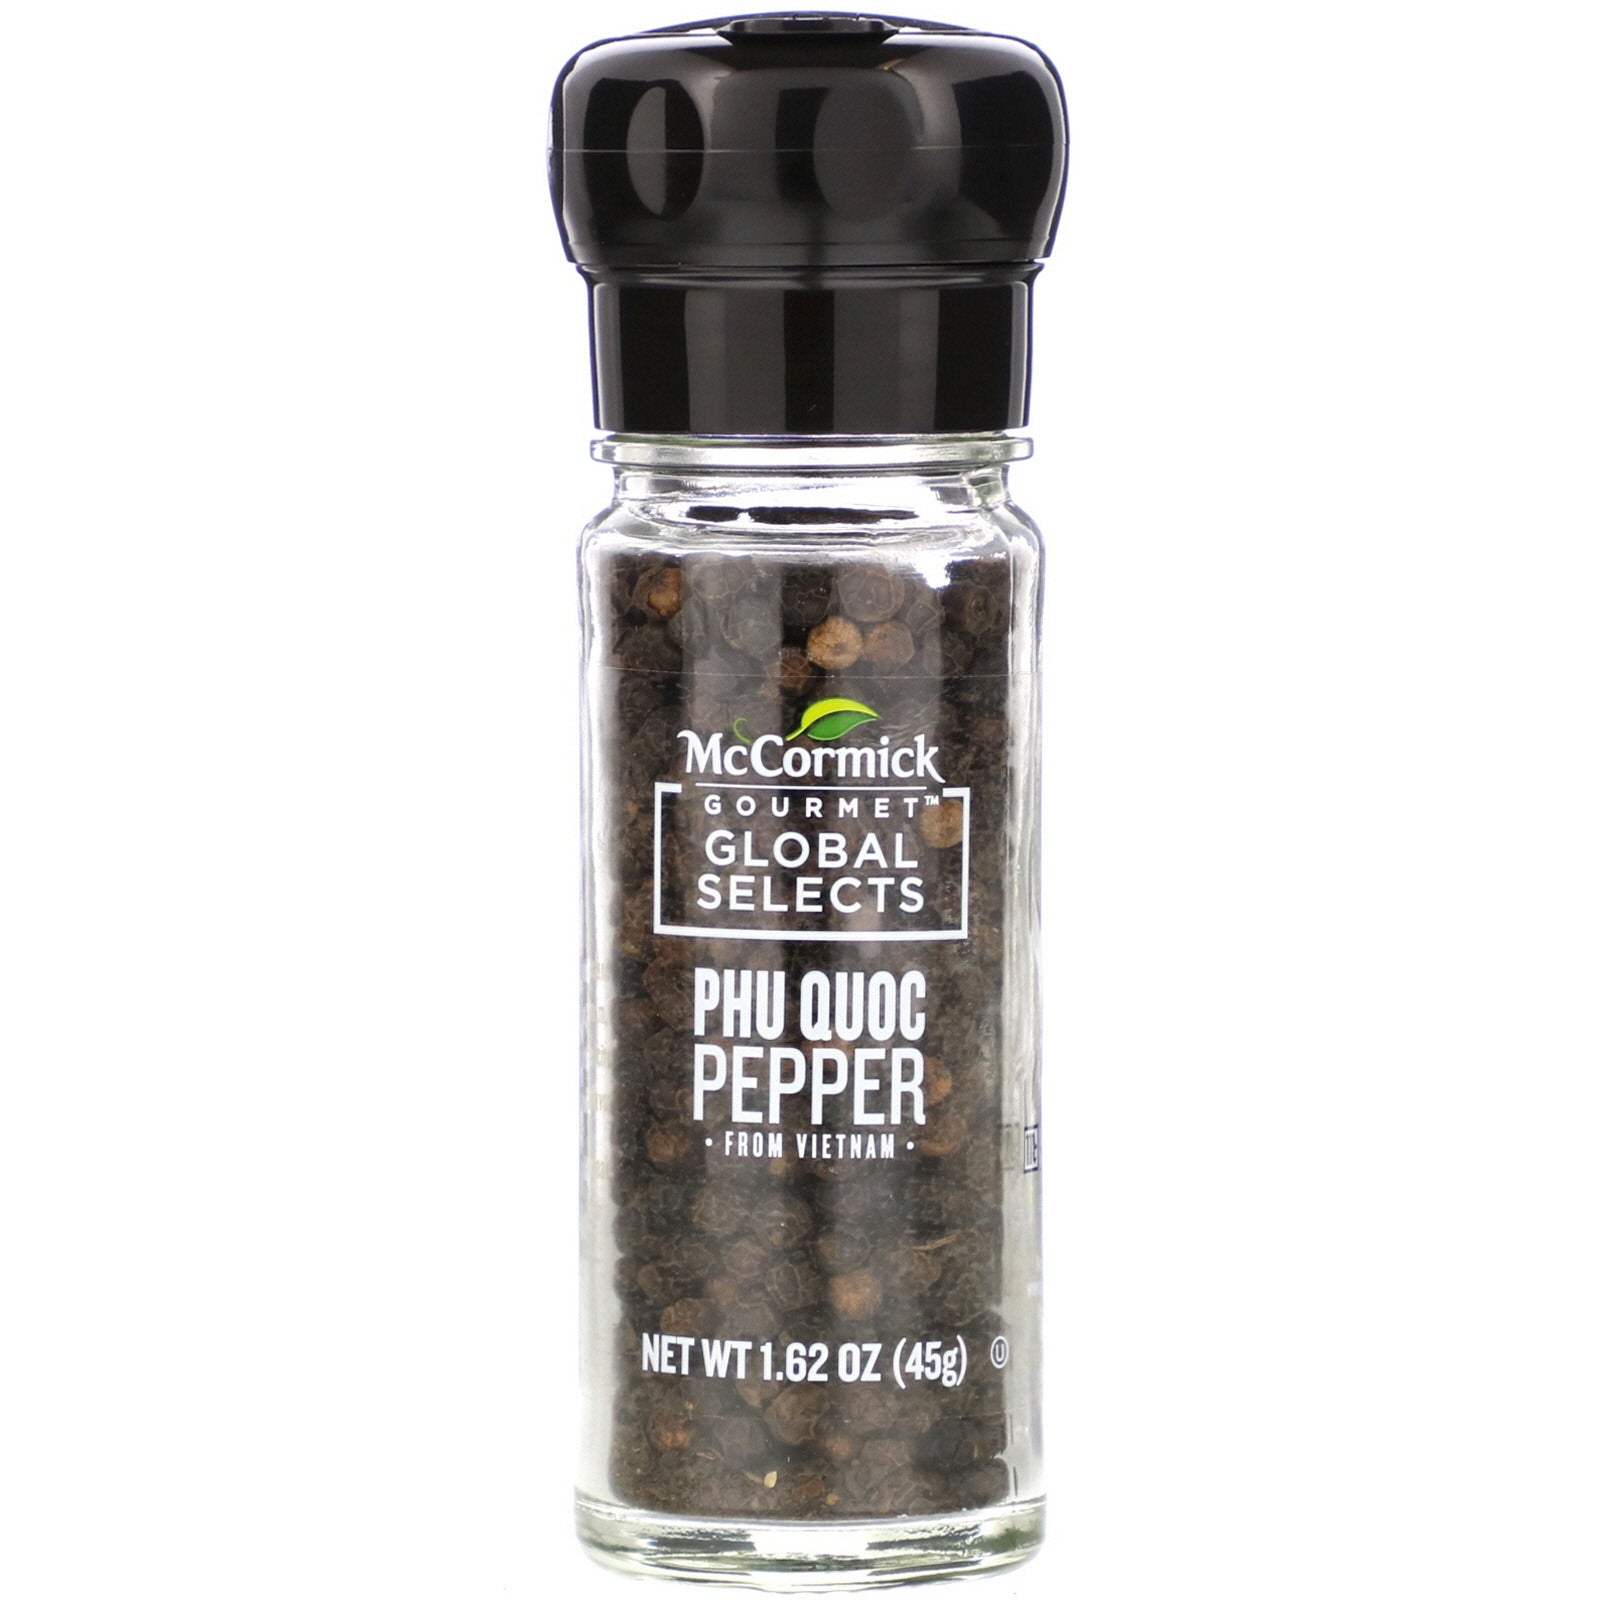 McCormick Gourmet Global Selects, Phu Quoc Pepper From Vietnam, Bold, 1.62 oz (45 g)